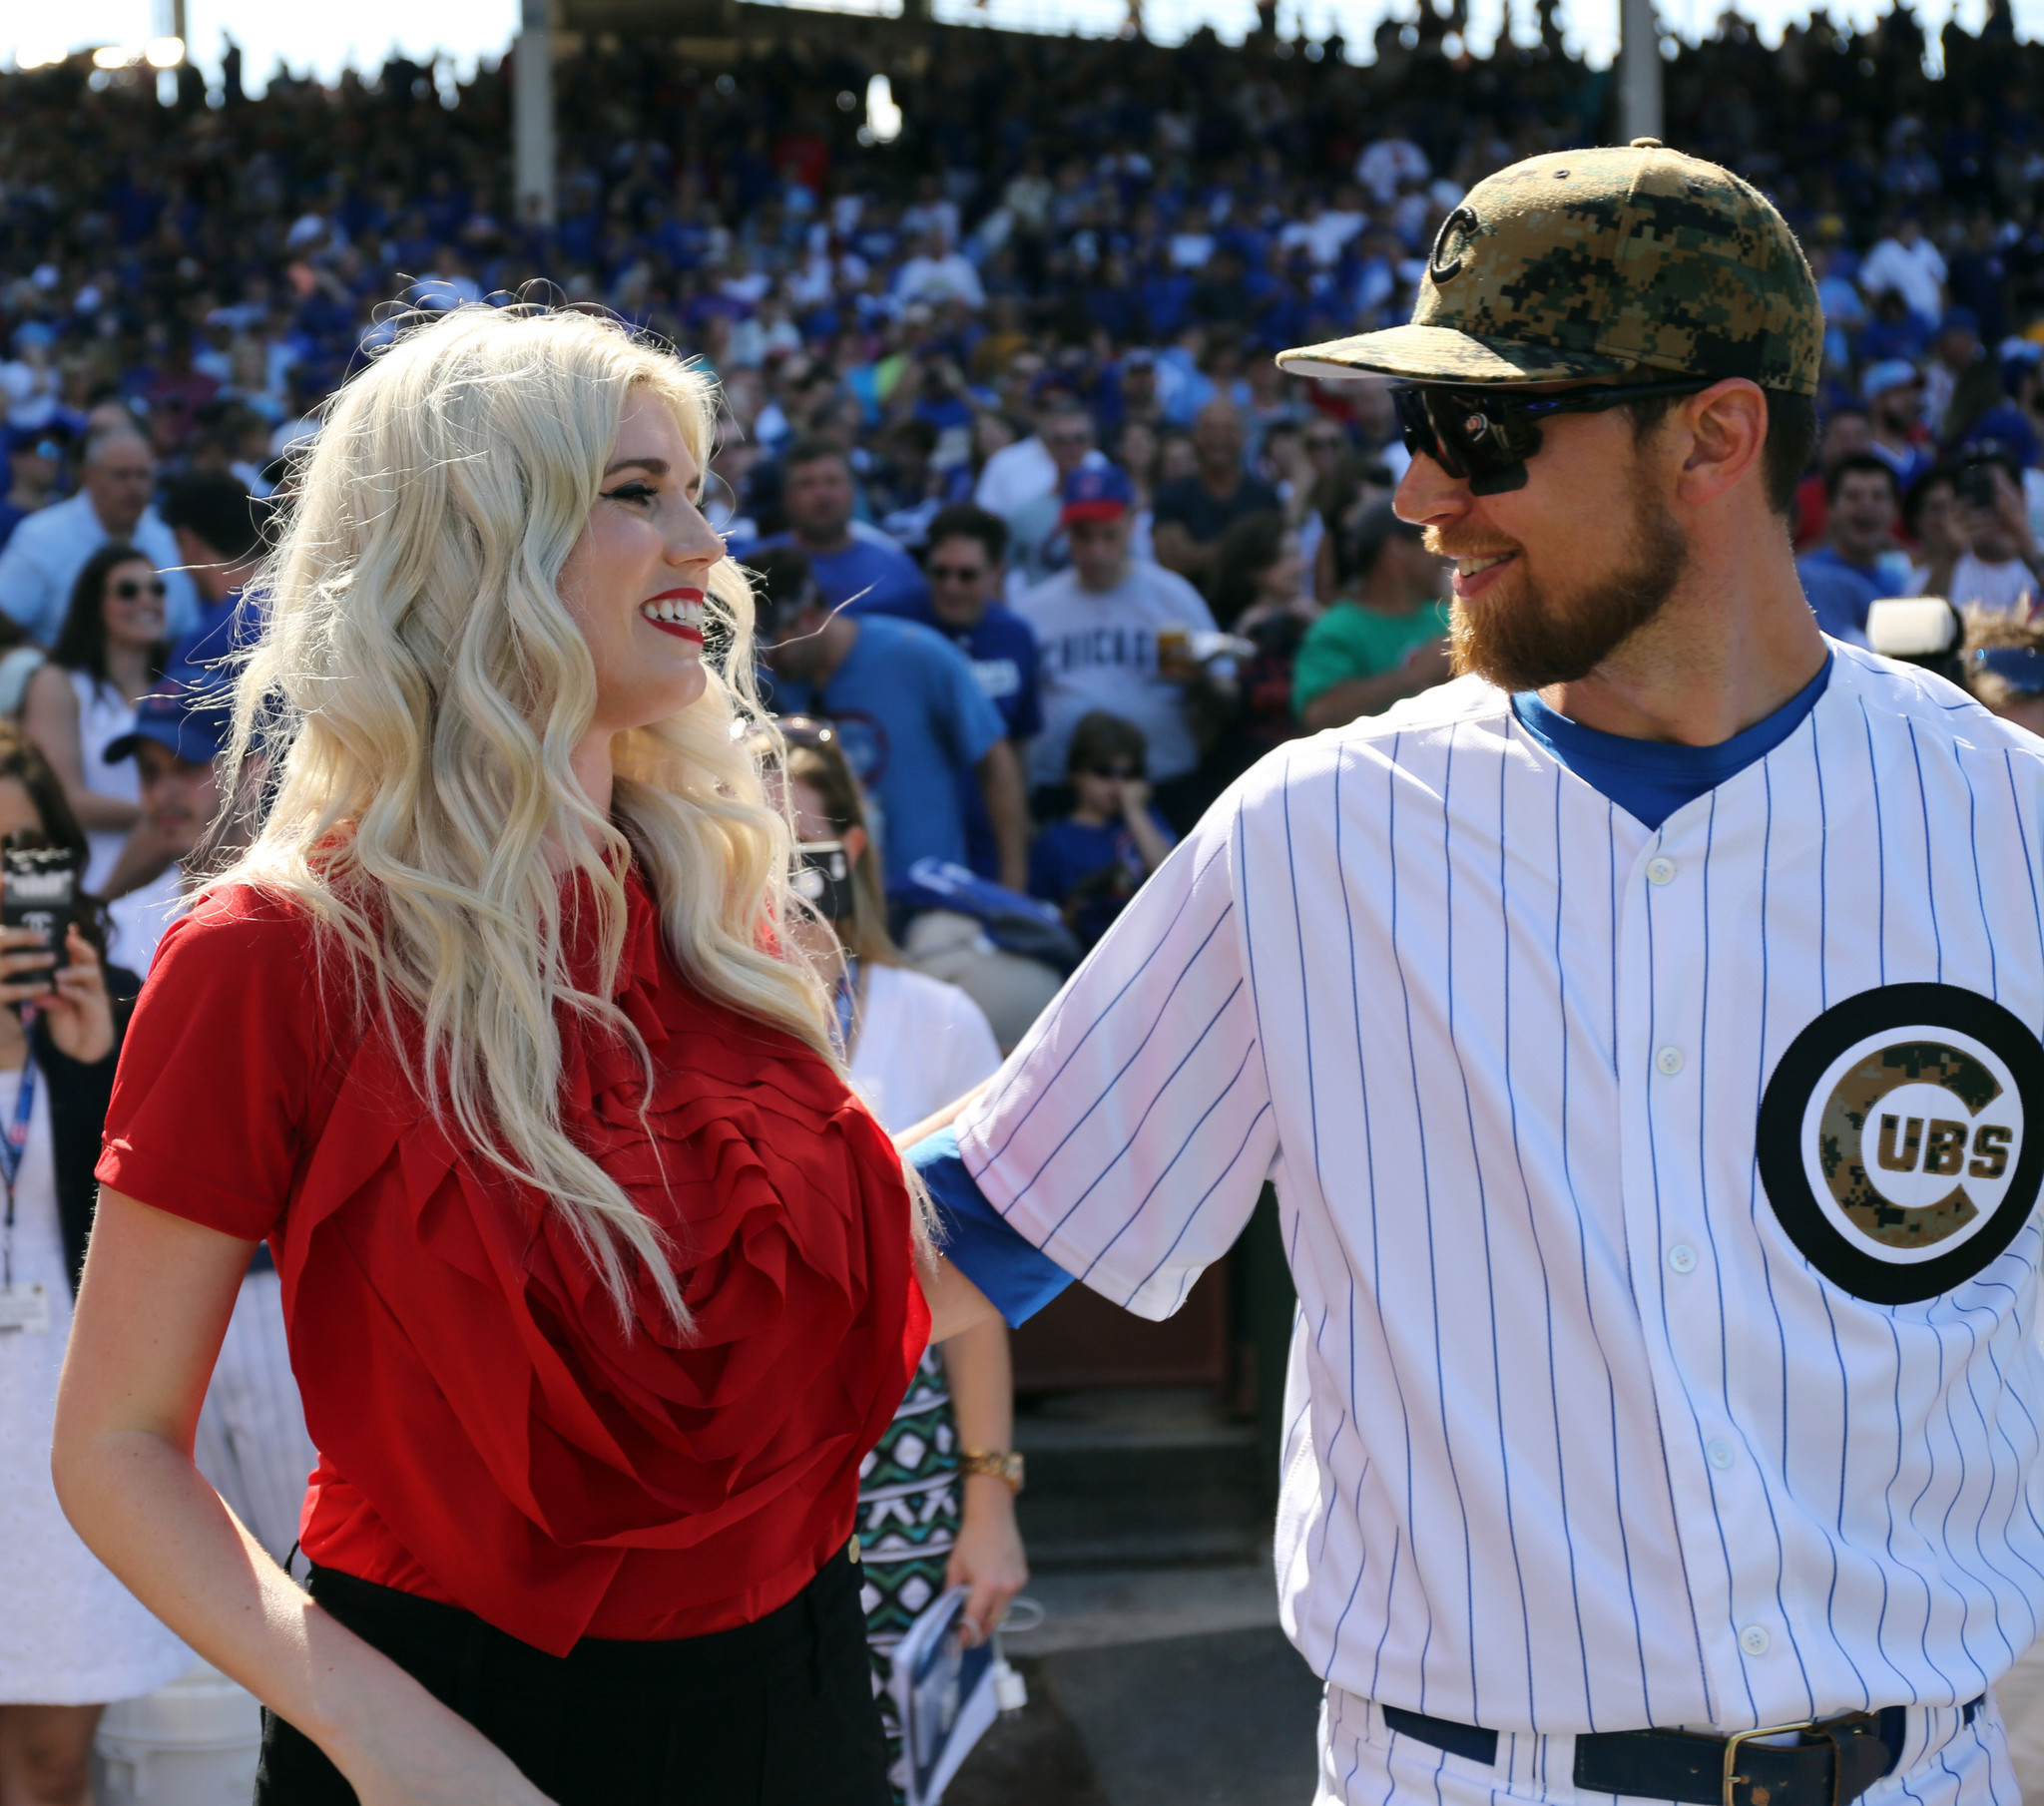 Double Play: Faith and Family First' by Ben & Julianna Zobrist 